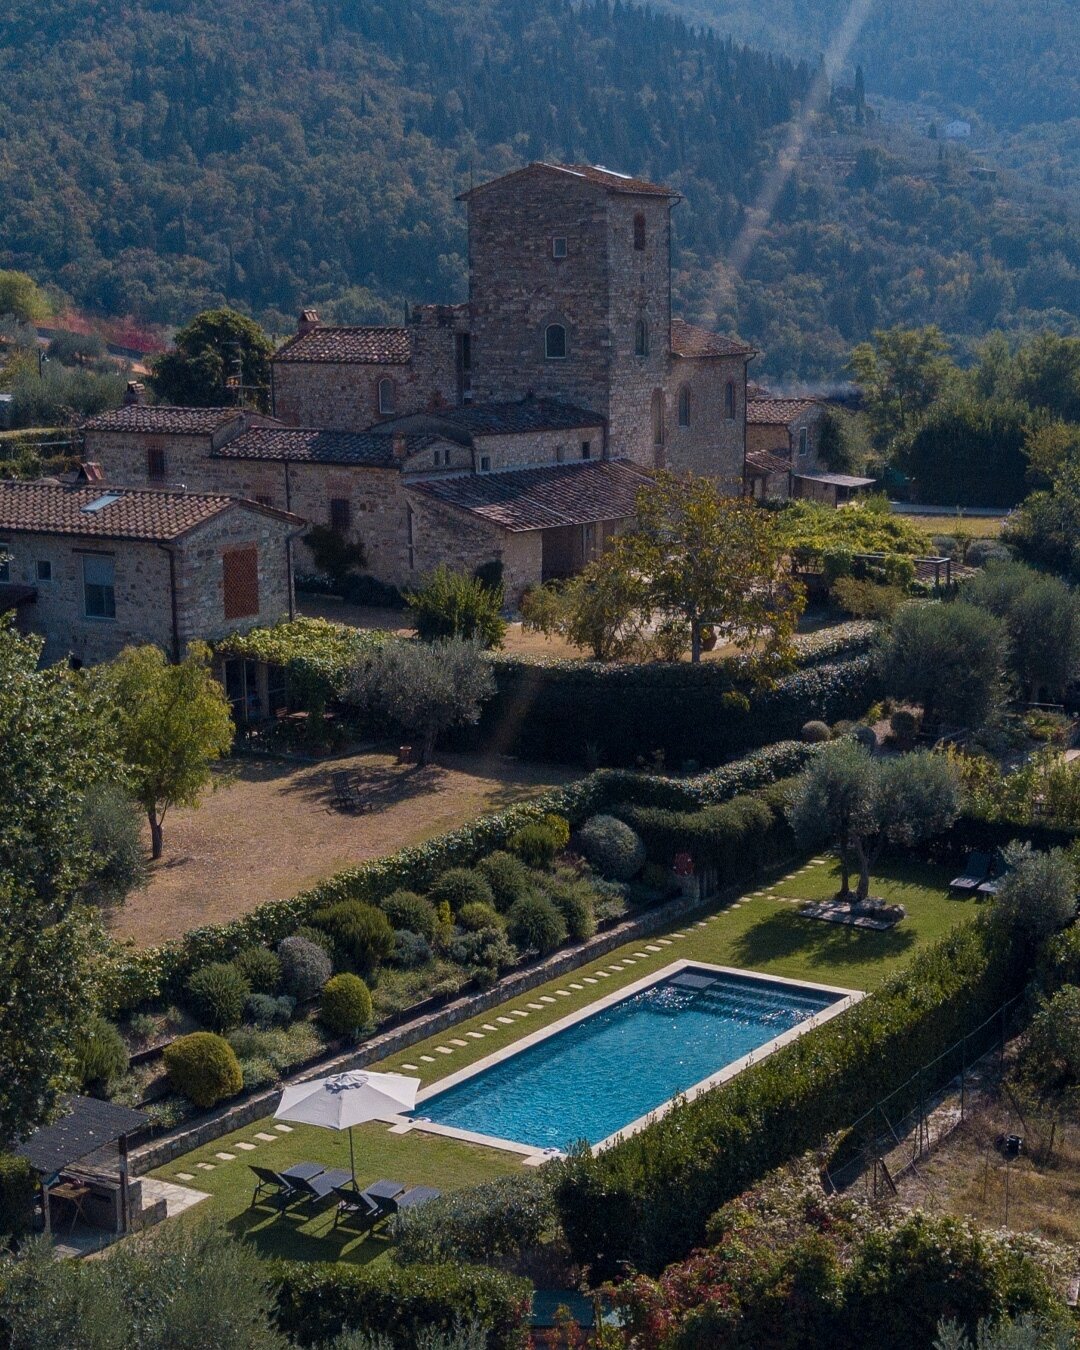 Torre di Sopra, just a 20 minute drive from Florence, serves as the perfect base for discovering Tuscany.⁠
⁠
This medieval estate, which was skillfully revitalized by the renowned architect Bruno Sacchi in 1976, stands as a unique fusion of the past 